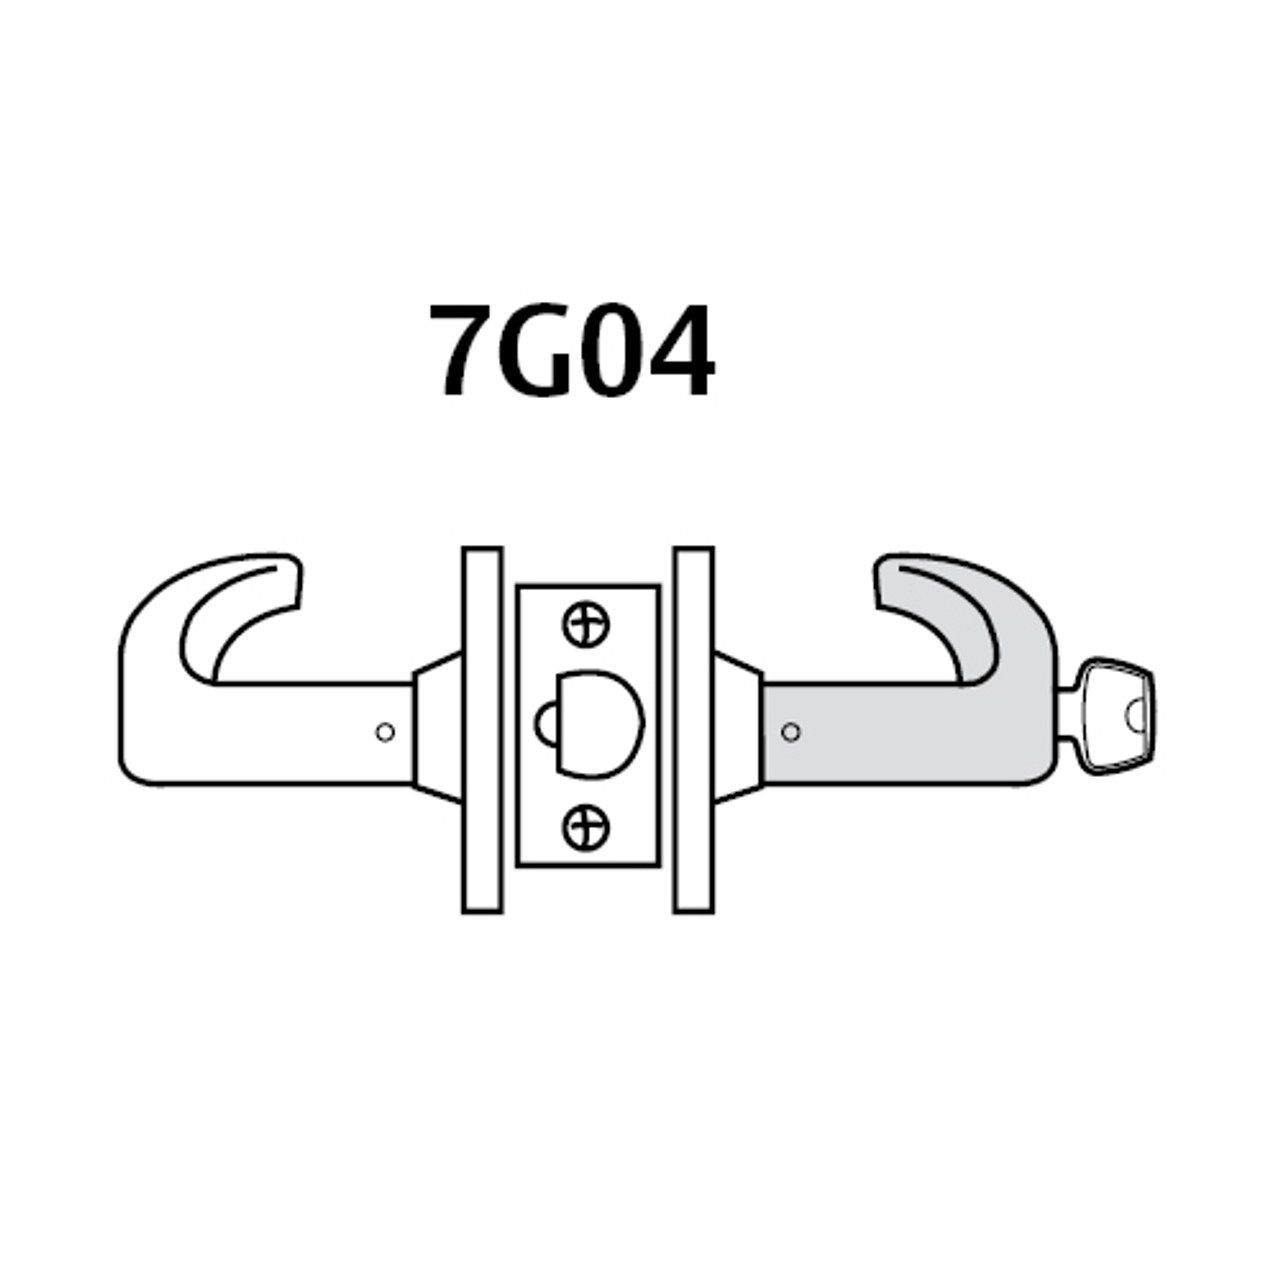 2870-7G04-LL-04 Sargent 7 Line Cylindrical Storeroom/Closet Locks with L Lever Design and L Rose Prepped for SFIC in Satin Brass